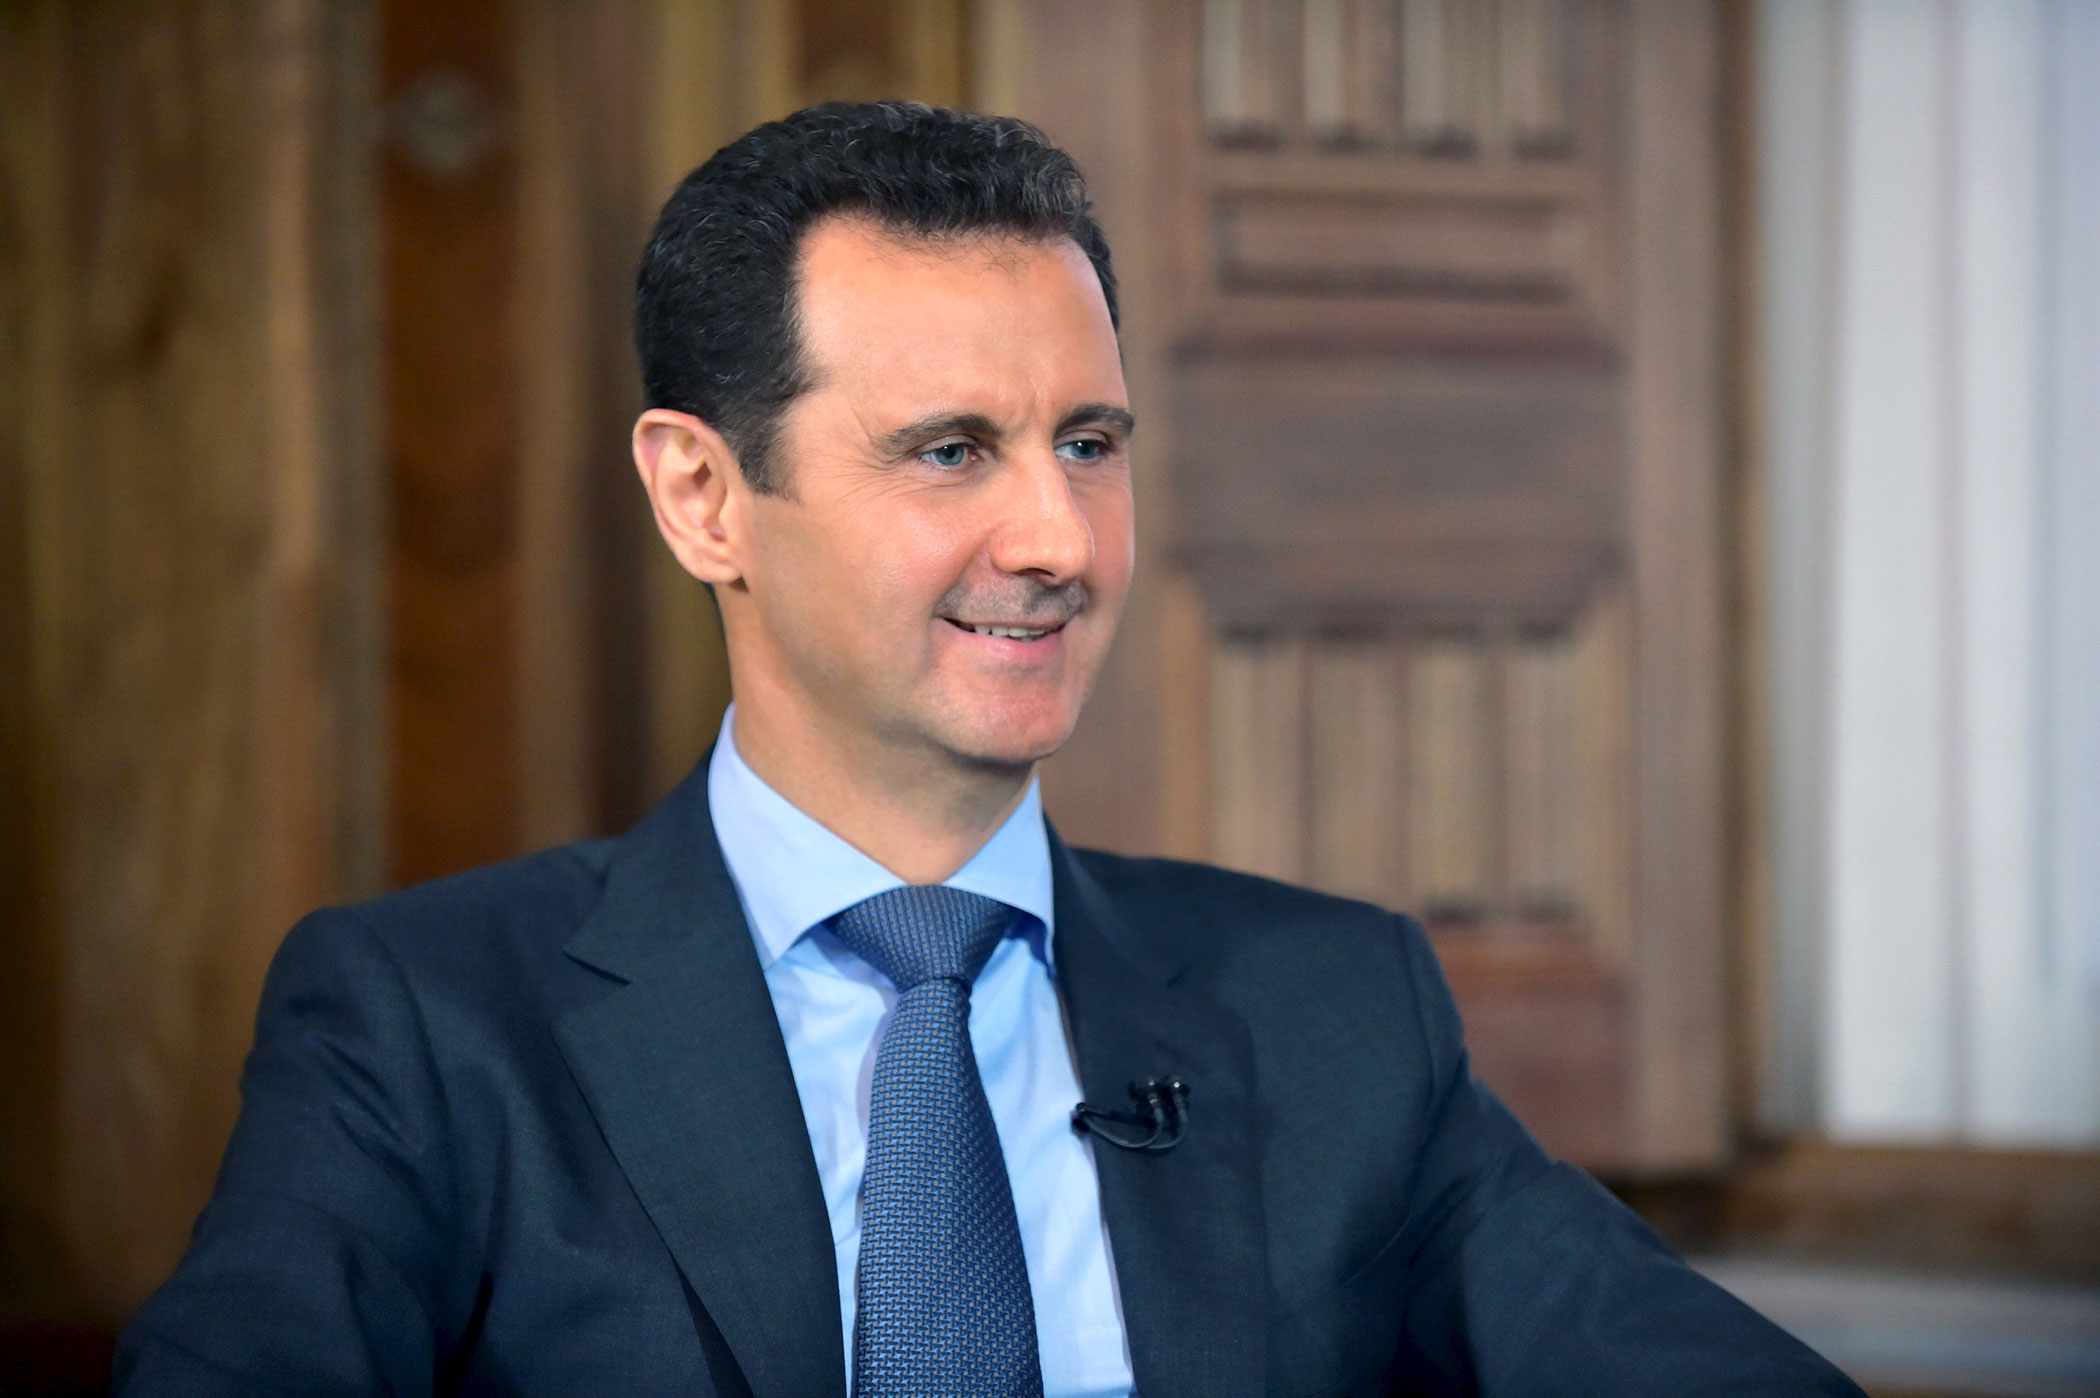 Syria's President Bashar al-Assad answers questions during an interview with al-Manar's journalist Amro Nassef on Aug. 25, 2015 in Damascus, Syria. (Sana Sana—Reuters)